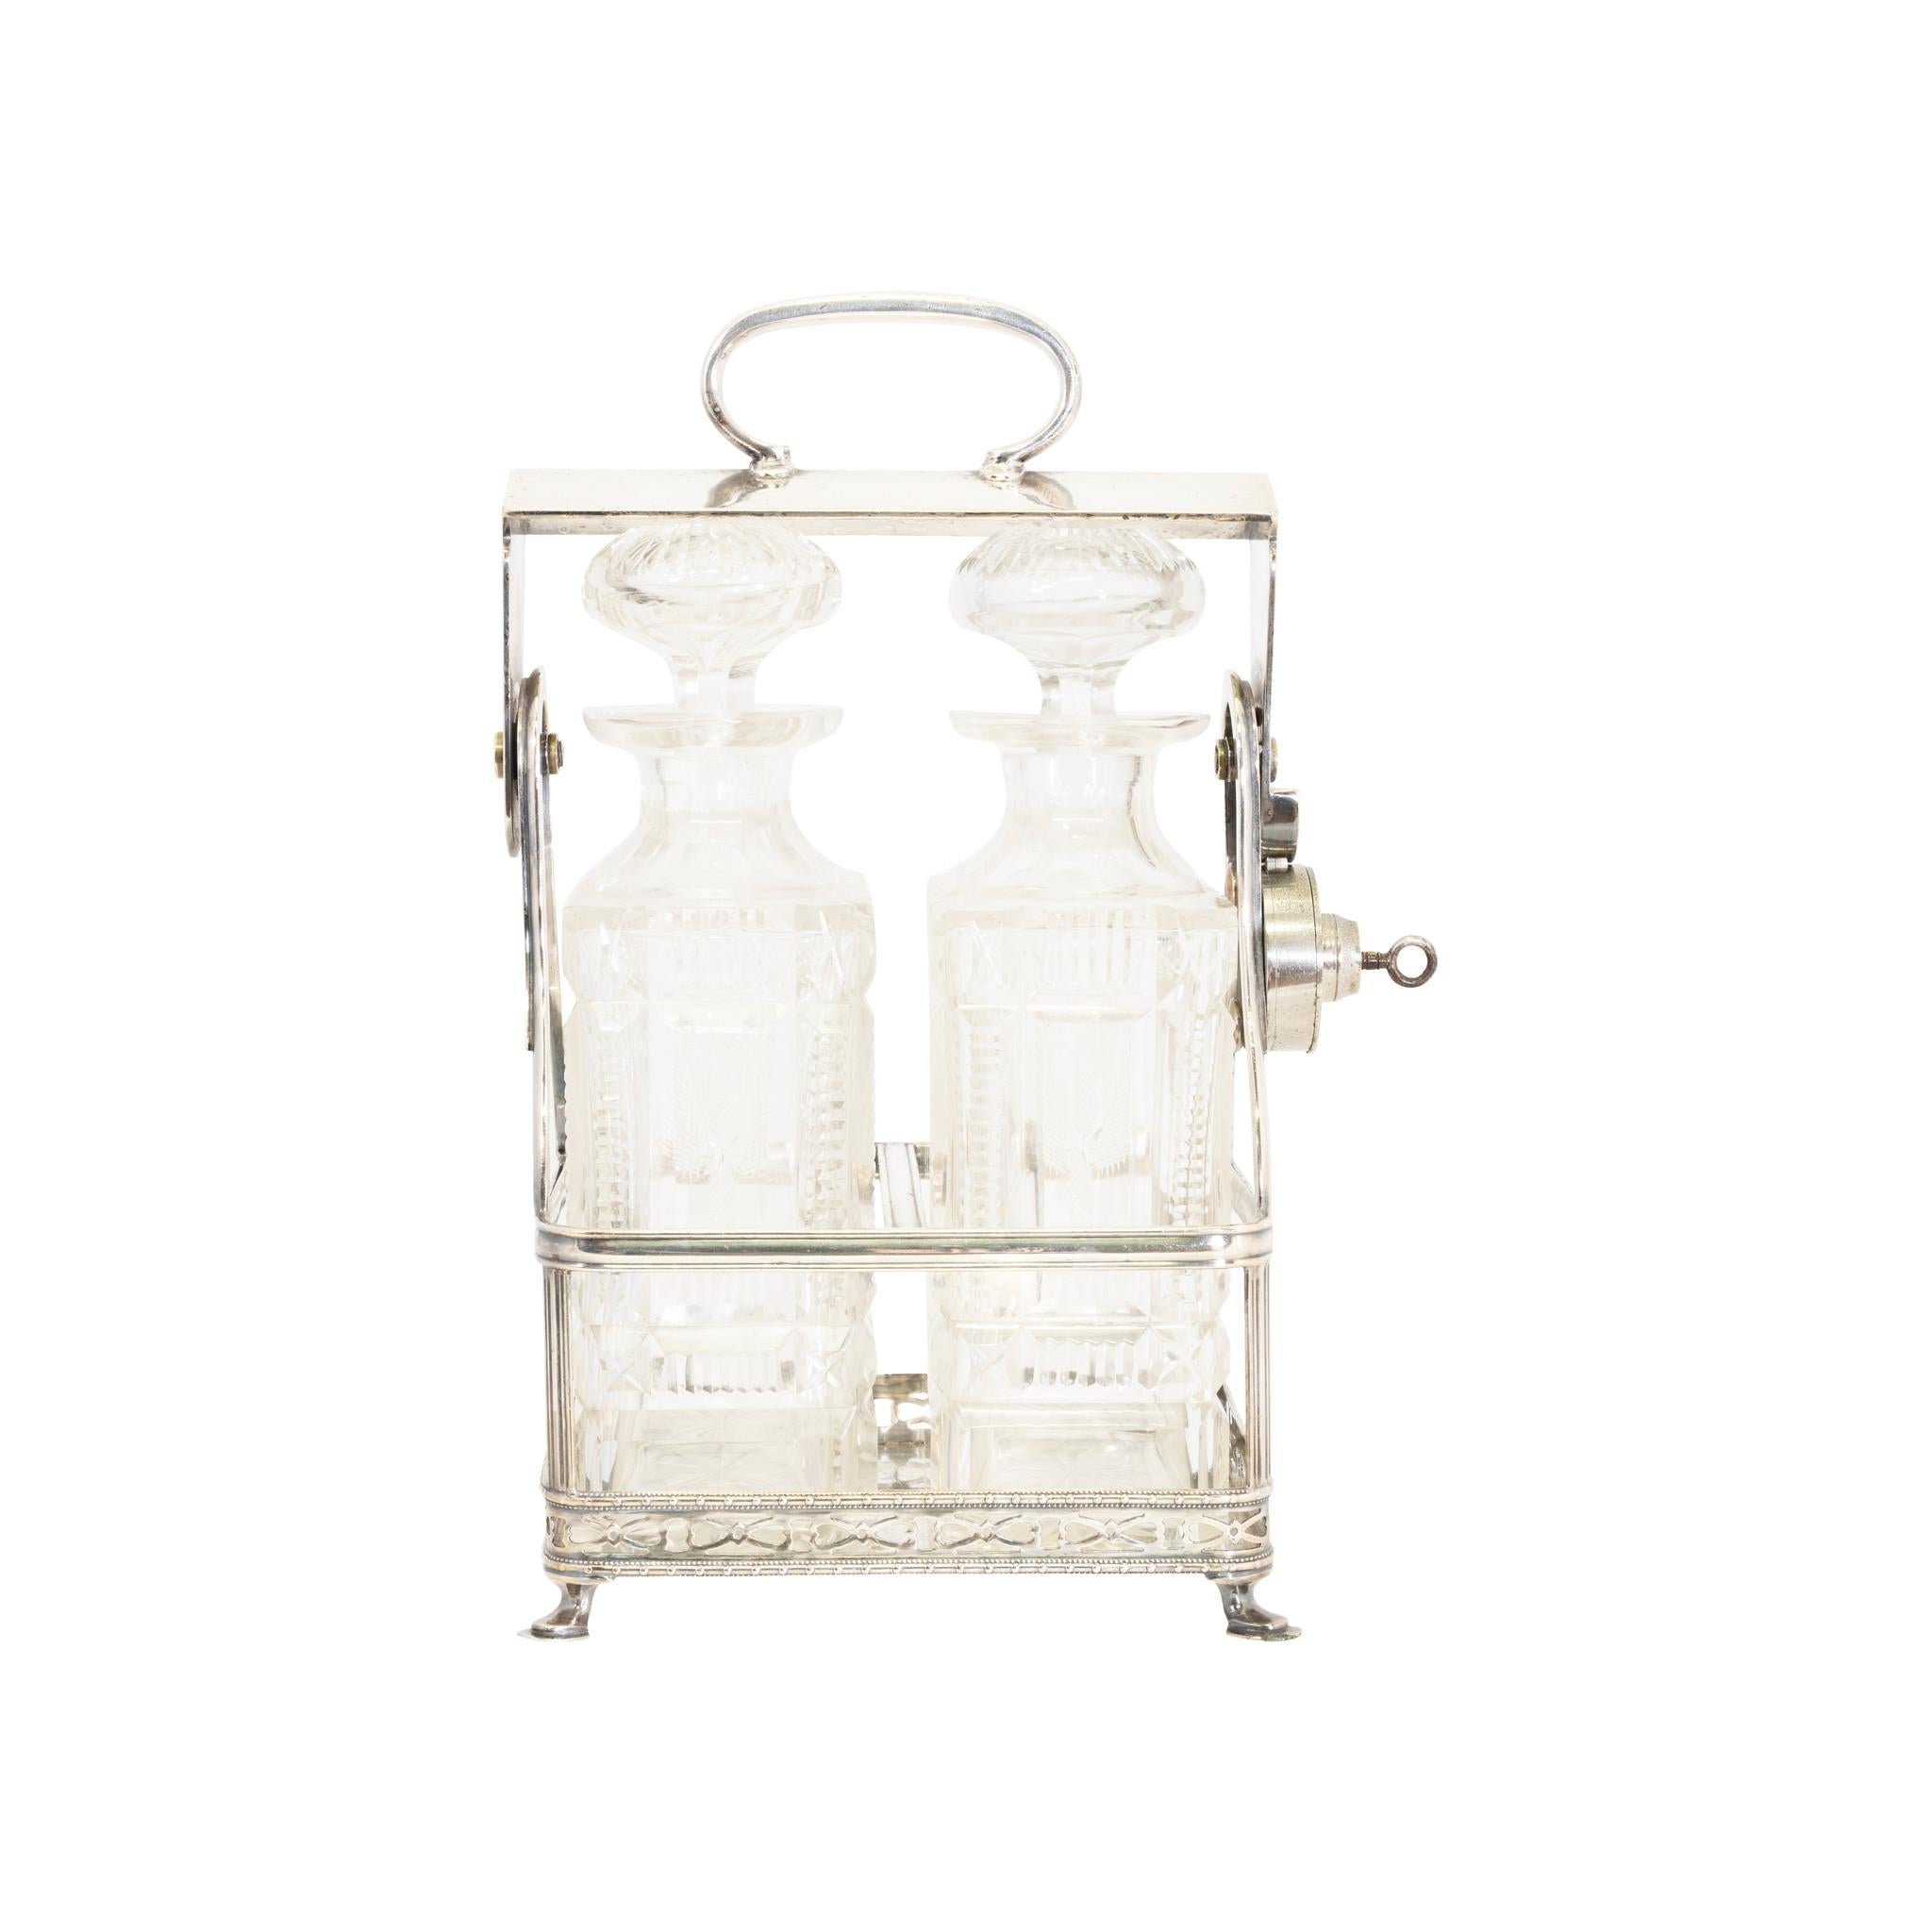 Matched pair of pressed glass liquor carafes in chrome carrier with lock - safe from the butler and maid. From a ranch in Montana.

PERIOD: First quarter 20th Century
ORIGIN: Montana
SIZE: 5